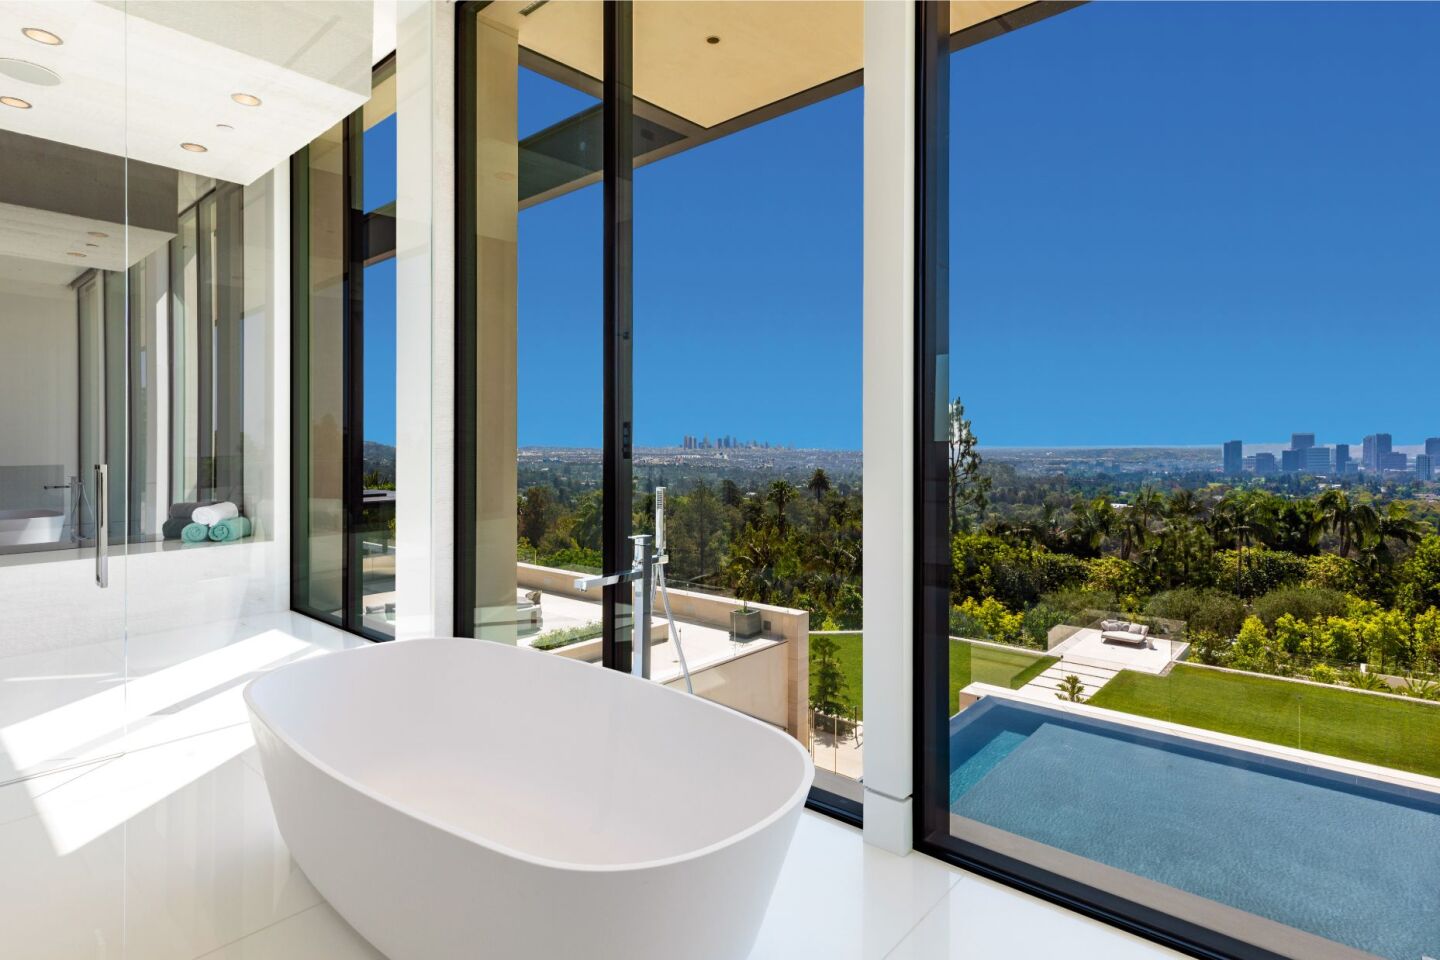 The bathroom has a bathtub that looks out on the property, trees and sky.